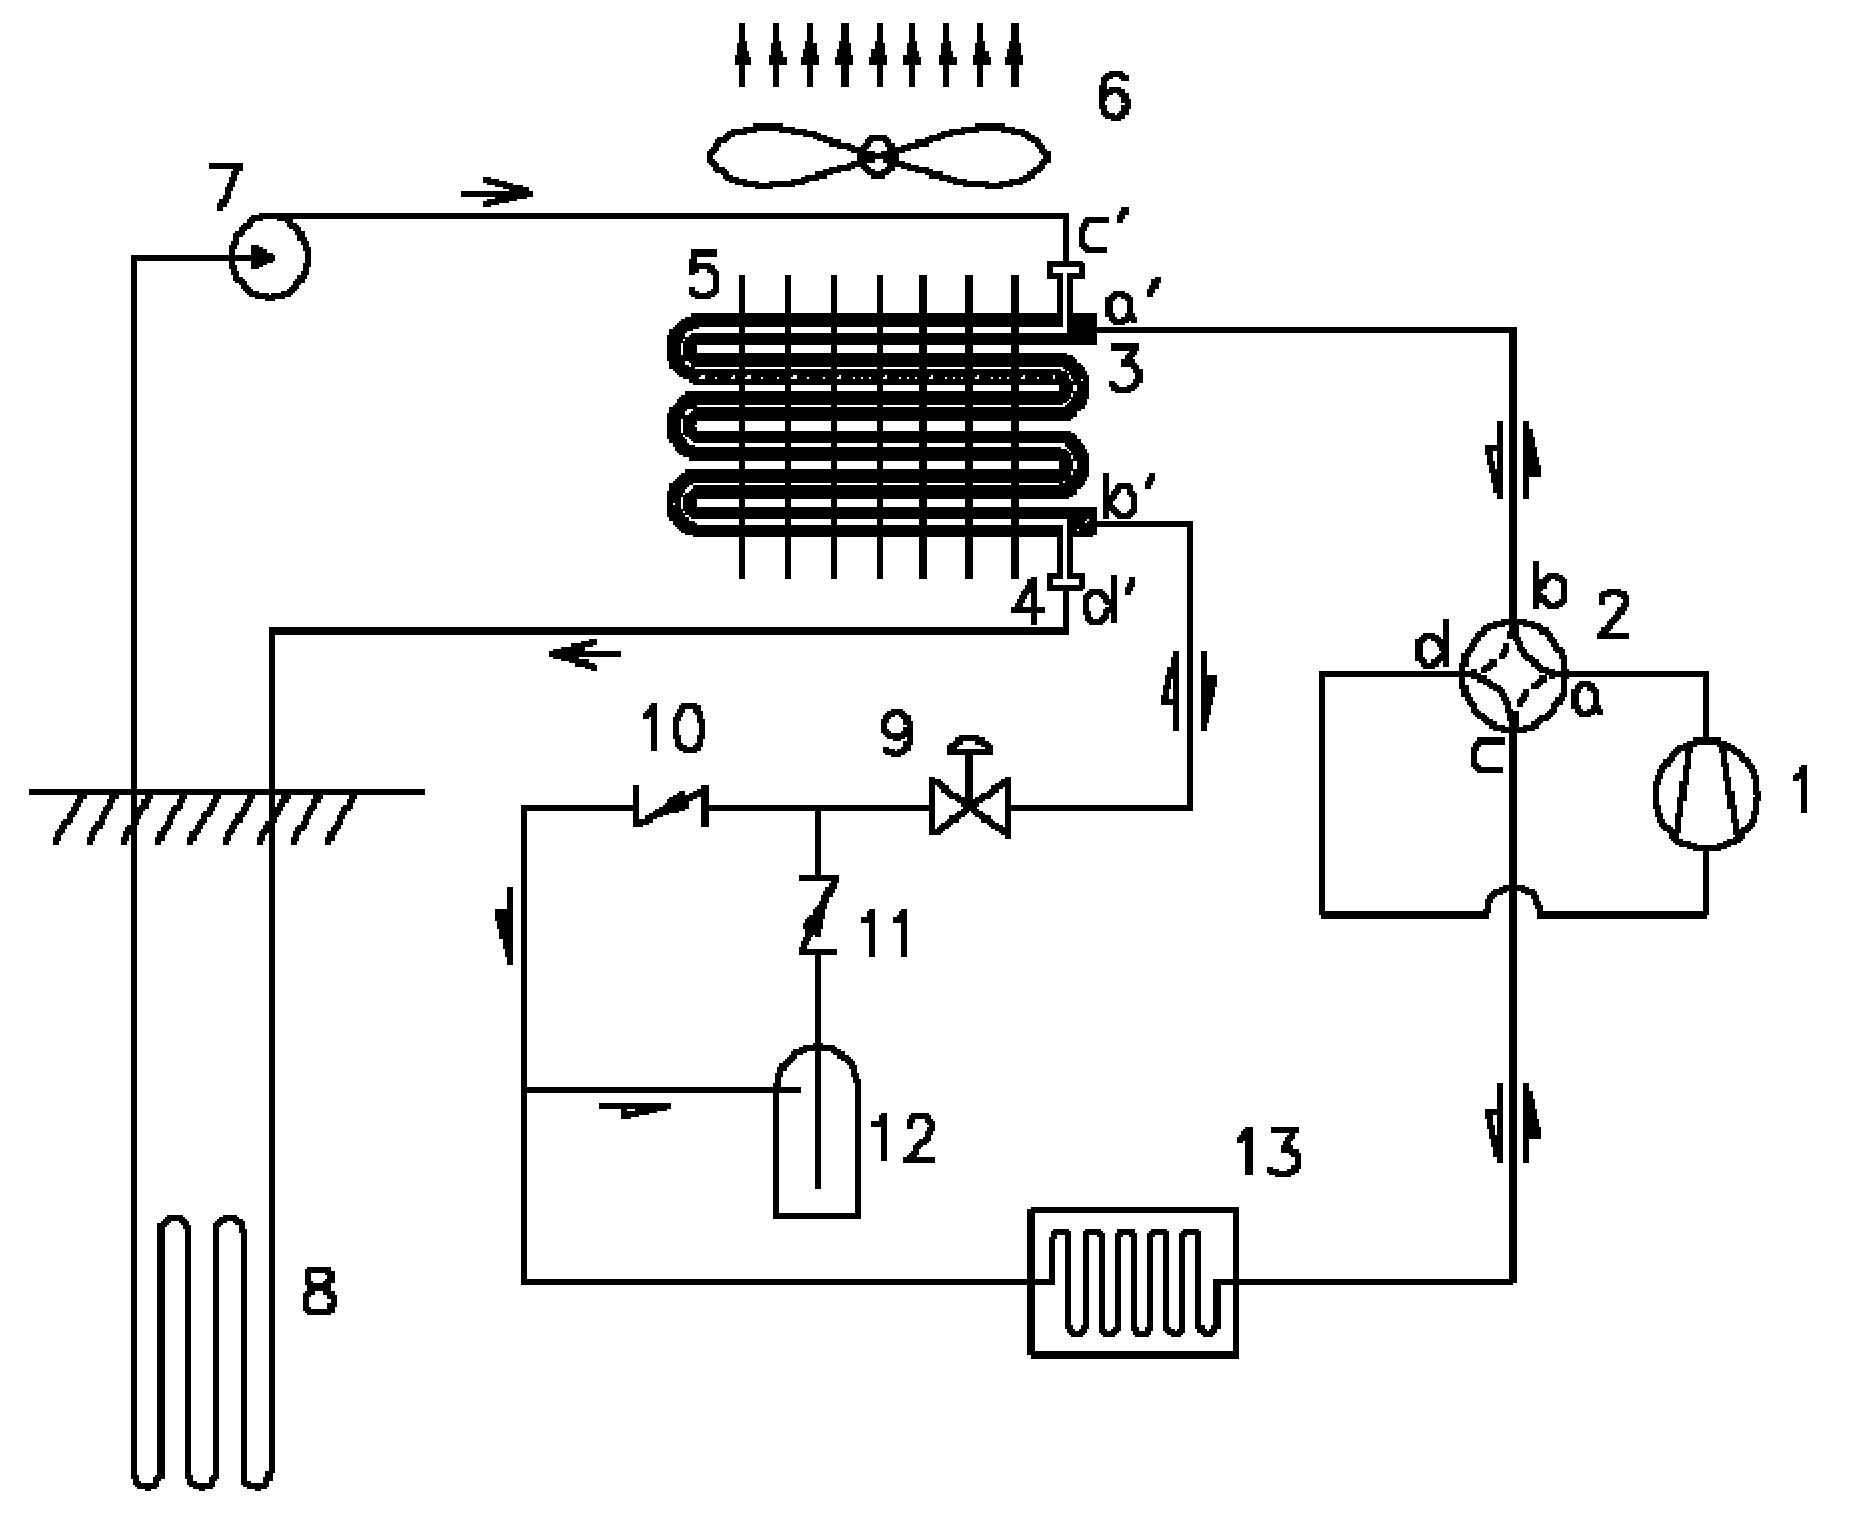 Integral air source and ground source composite heat pump device